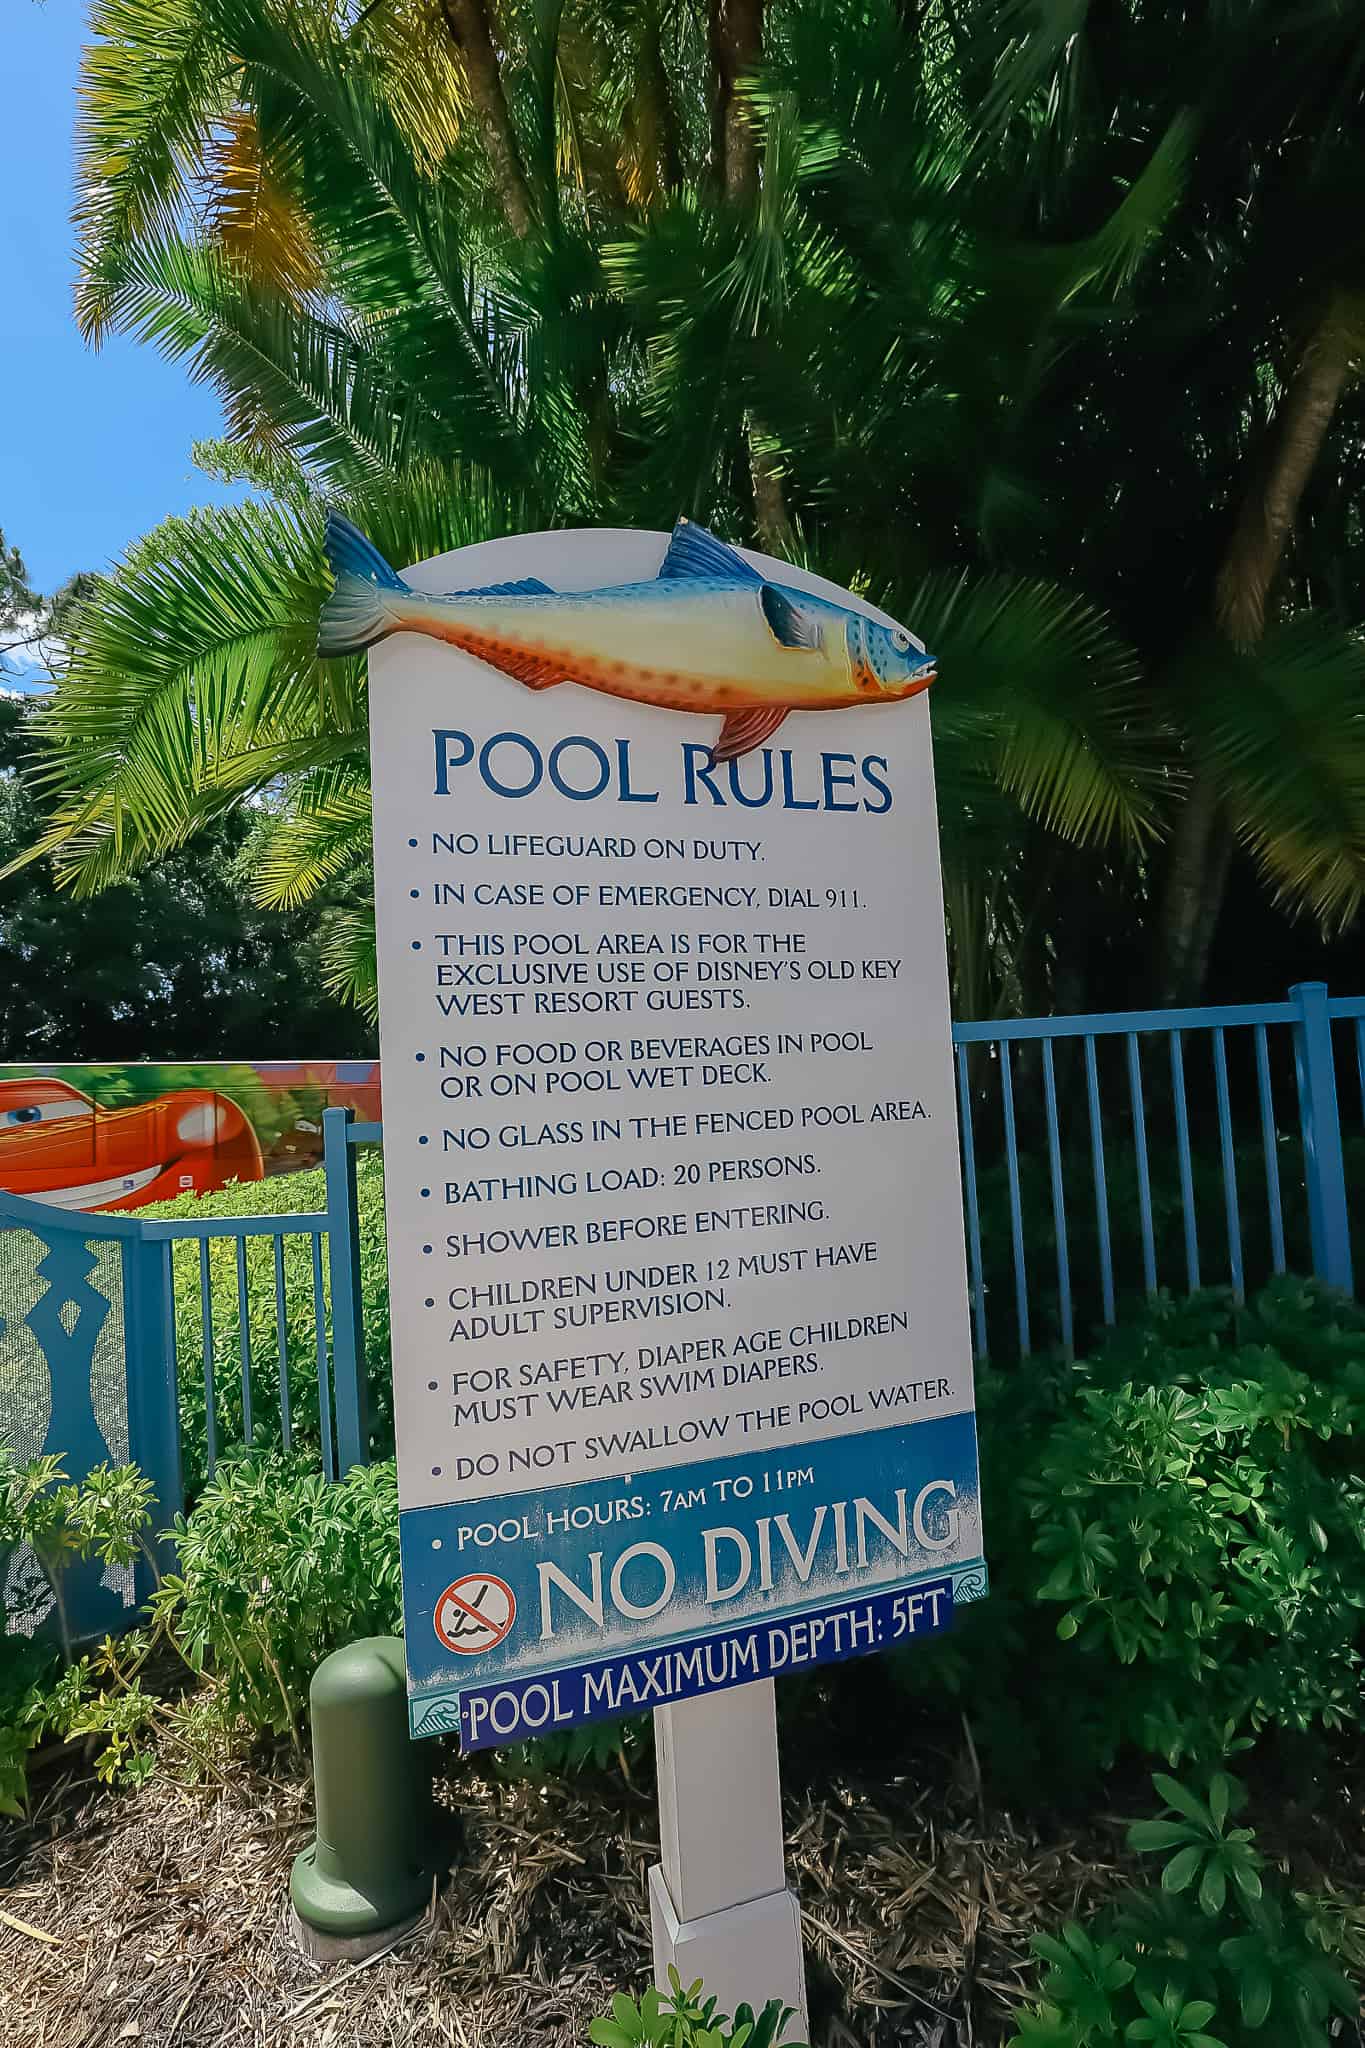 shows the pool hours for the quiet pools run from 7:00 a.m. to 11:00 p.m.